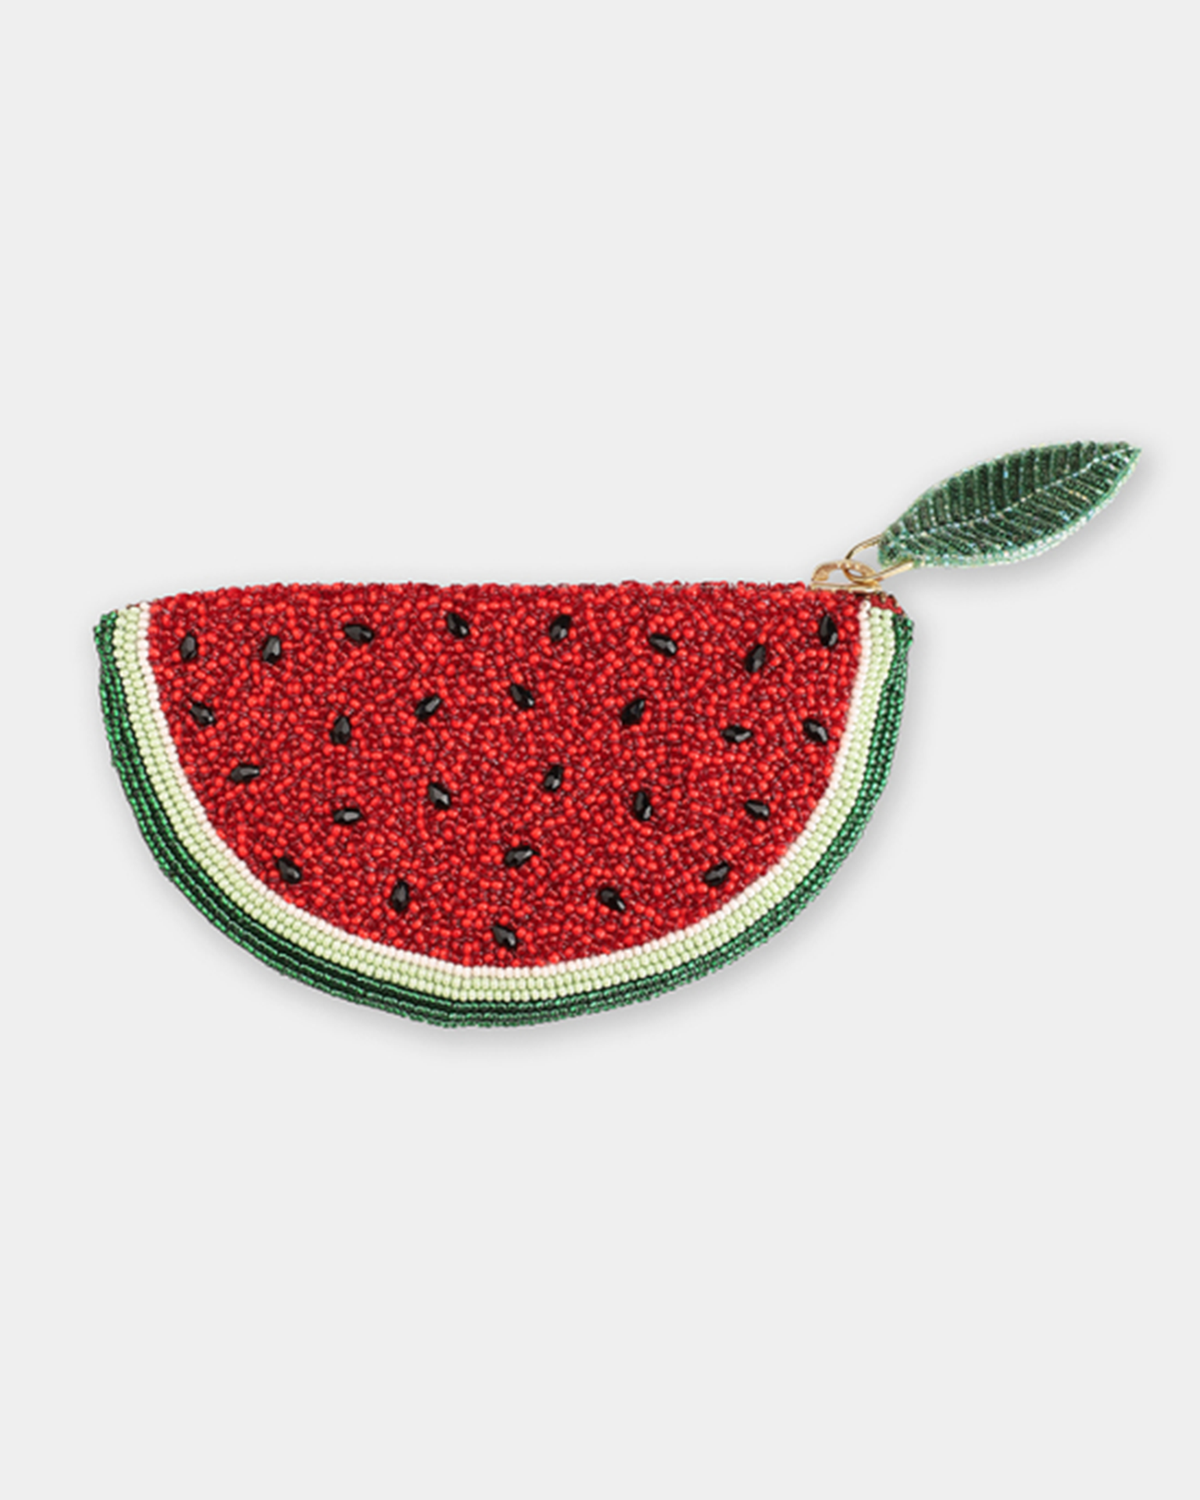 Olivia Dar Accessories Red Beaded Wallet in Watermelon